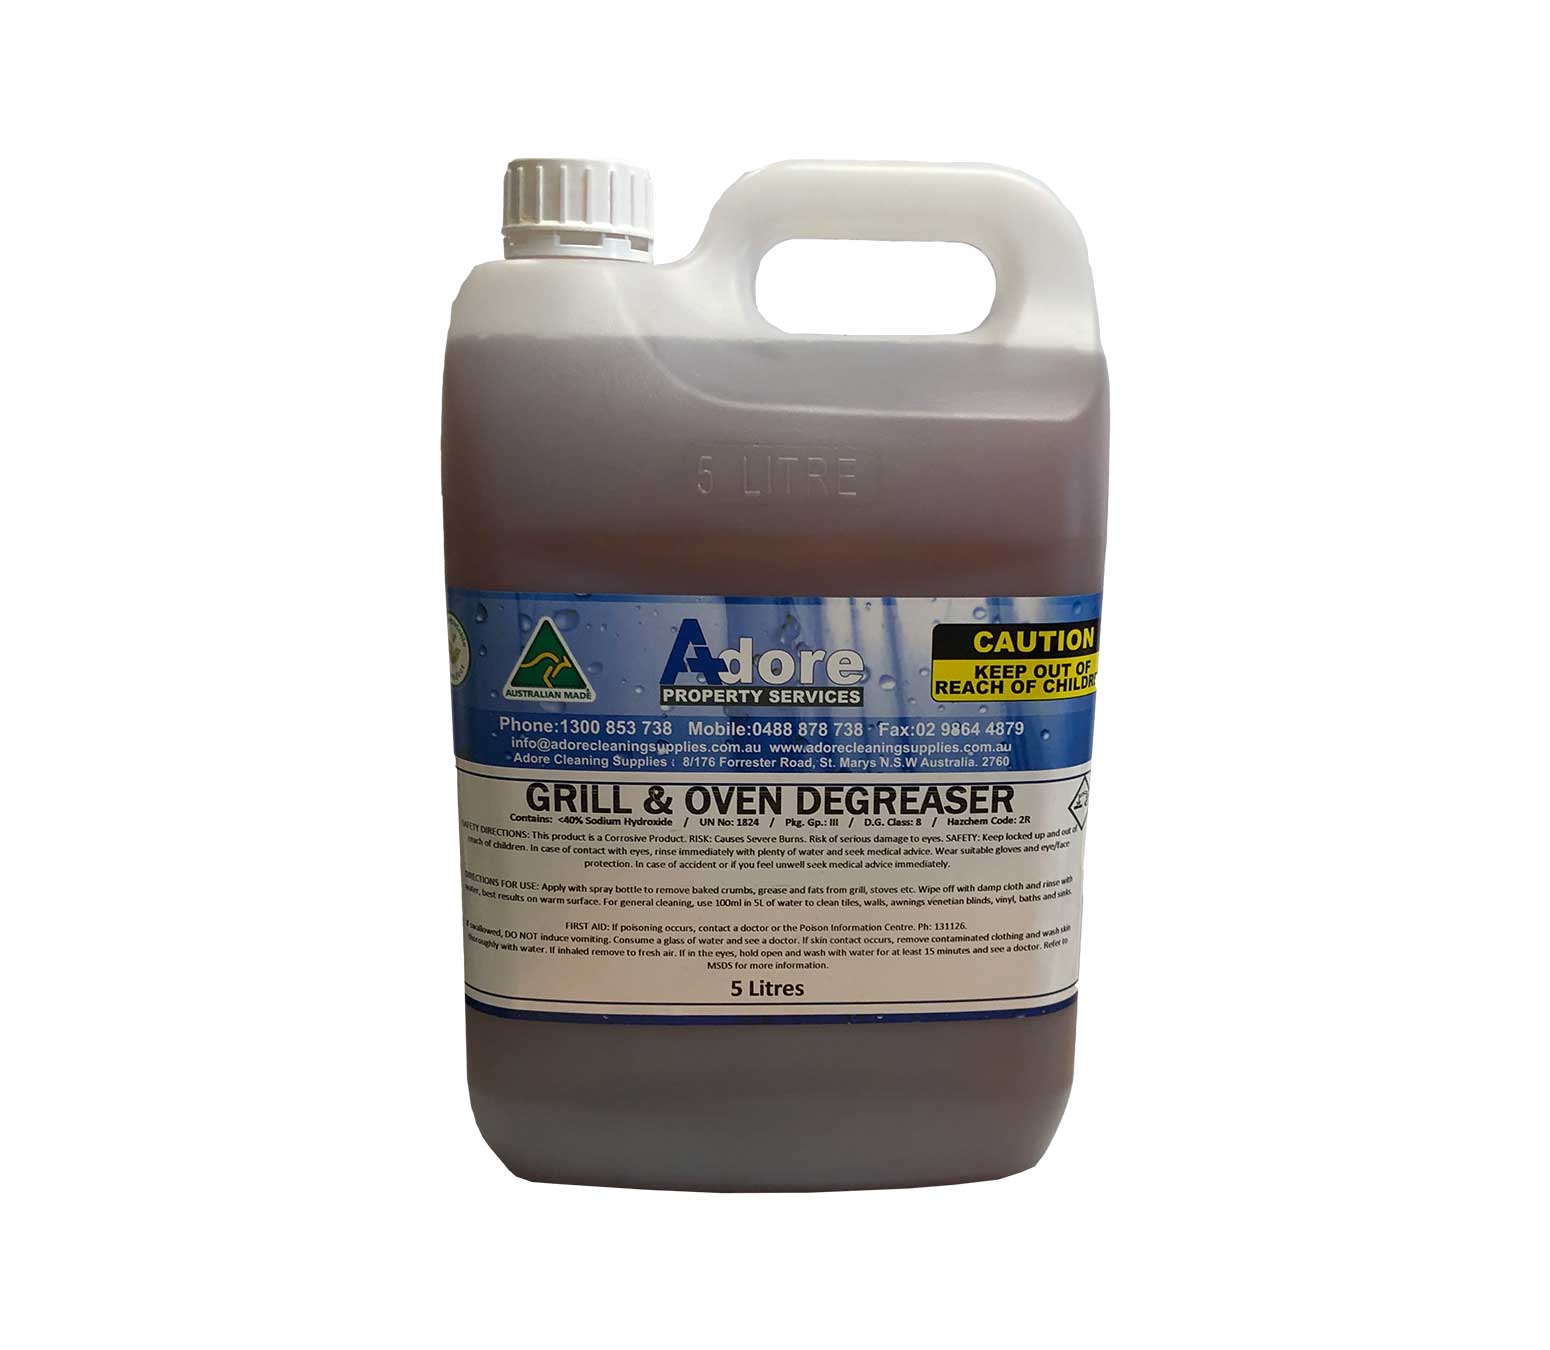 Grill & Oven Degreaser - Very Strong & Powerful Cleaner.